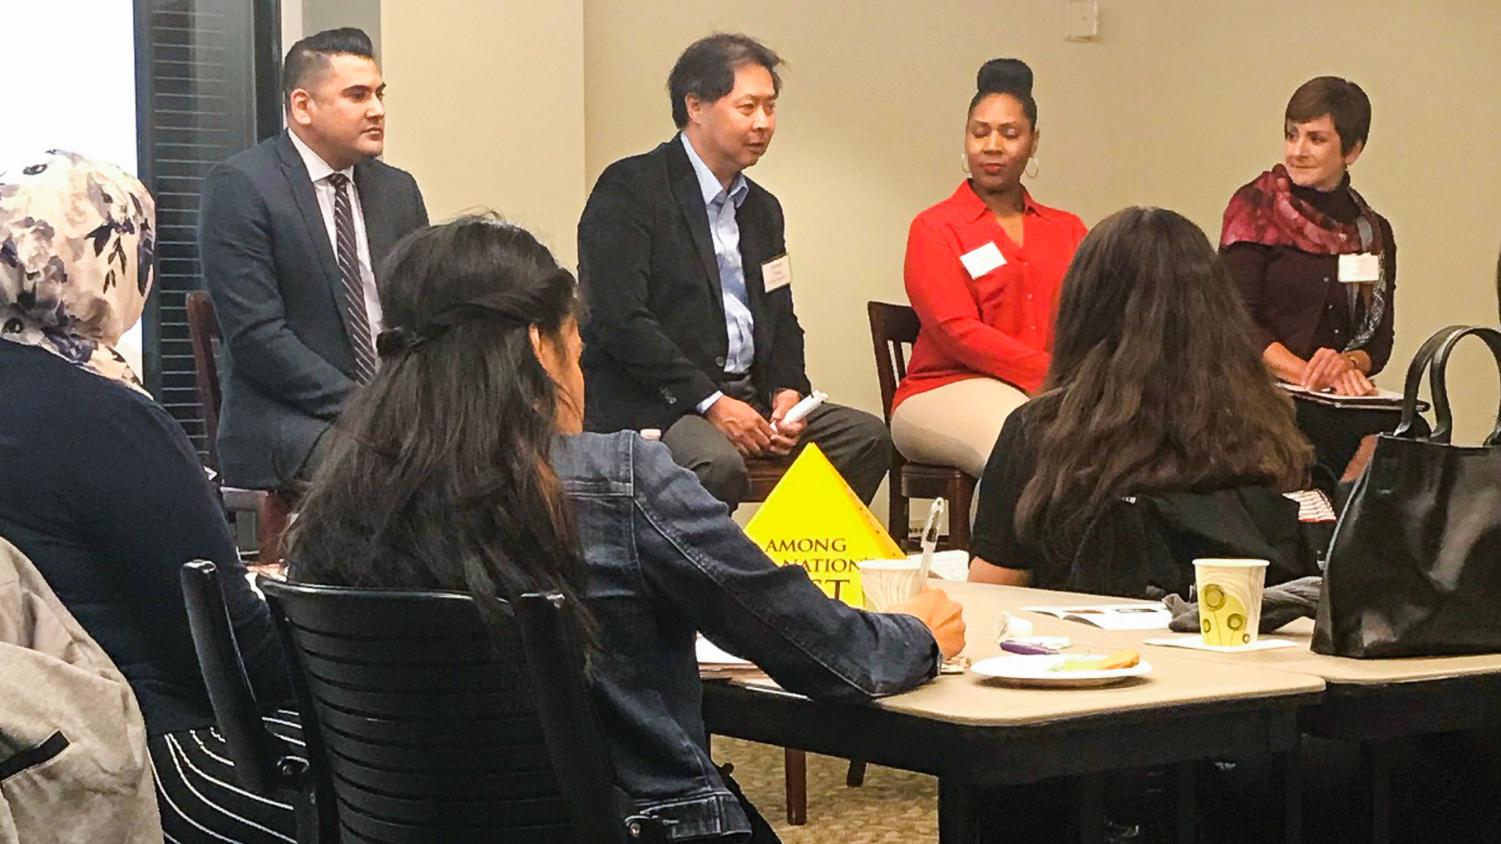 CSULB Alumni participated in a panel geared towards teaching students who are currently enrolled or have recently graduated valuable career building skills.